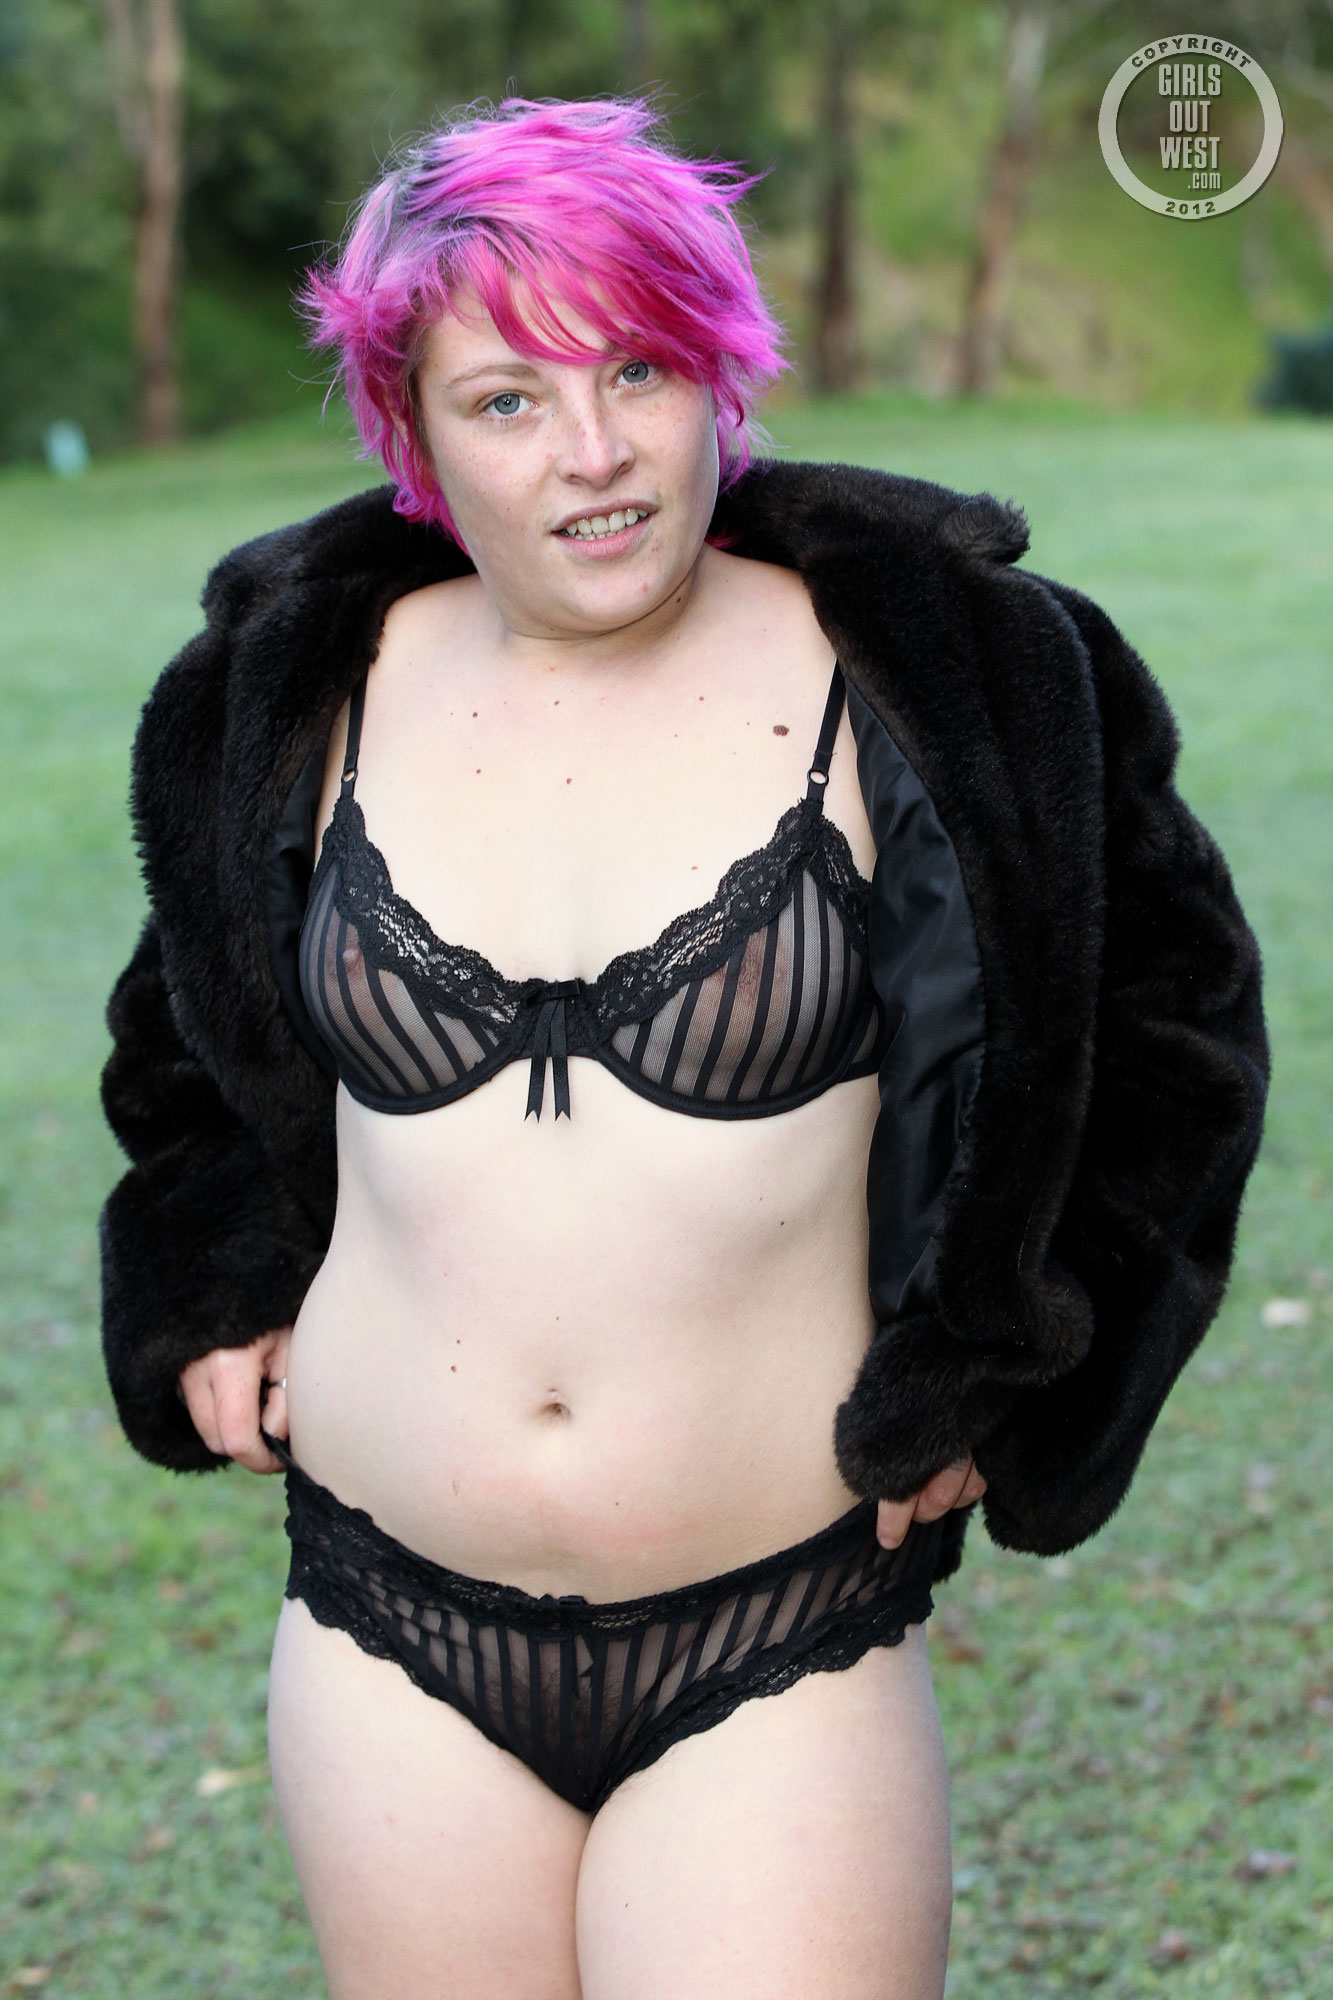 wpid-pink-haired-amateur-franky-flashing-her-pussy-outside-in-her-boots-and-coat14.jpg